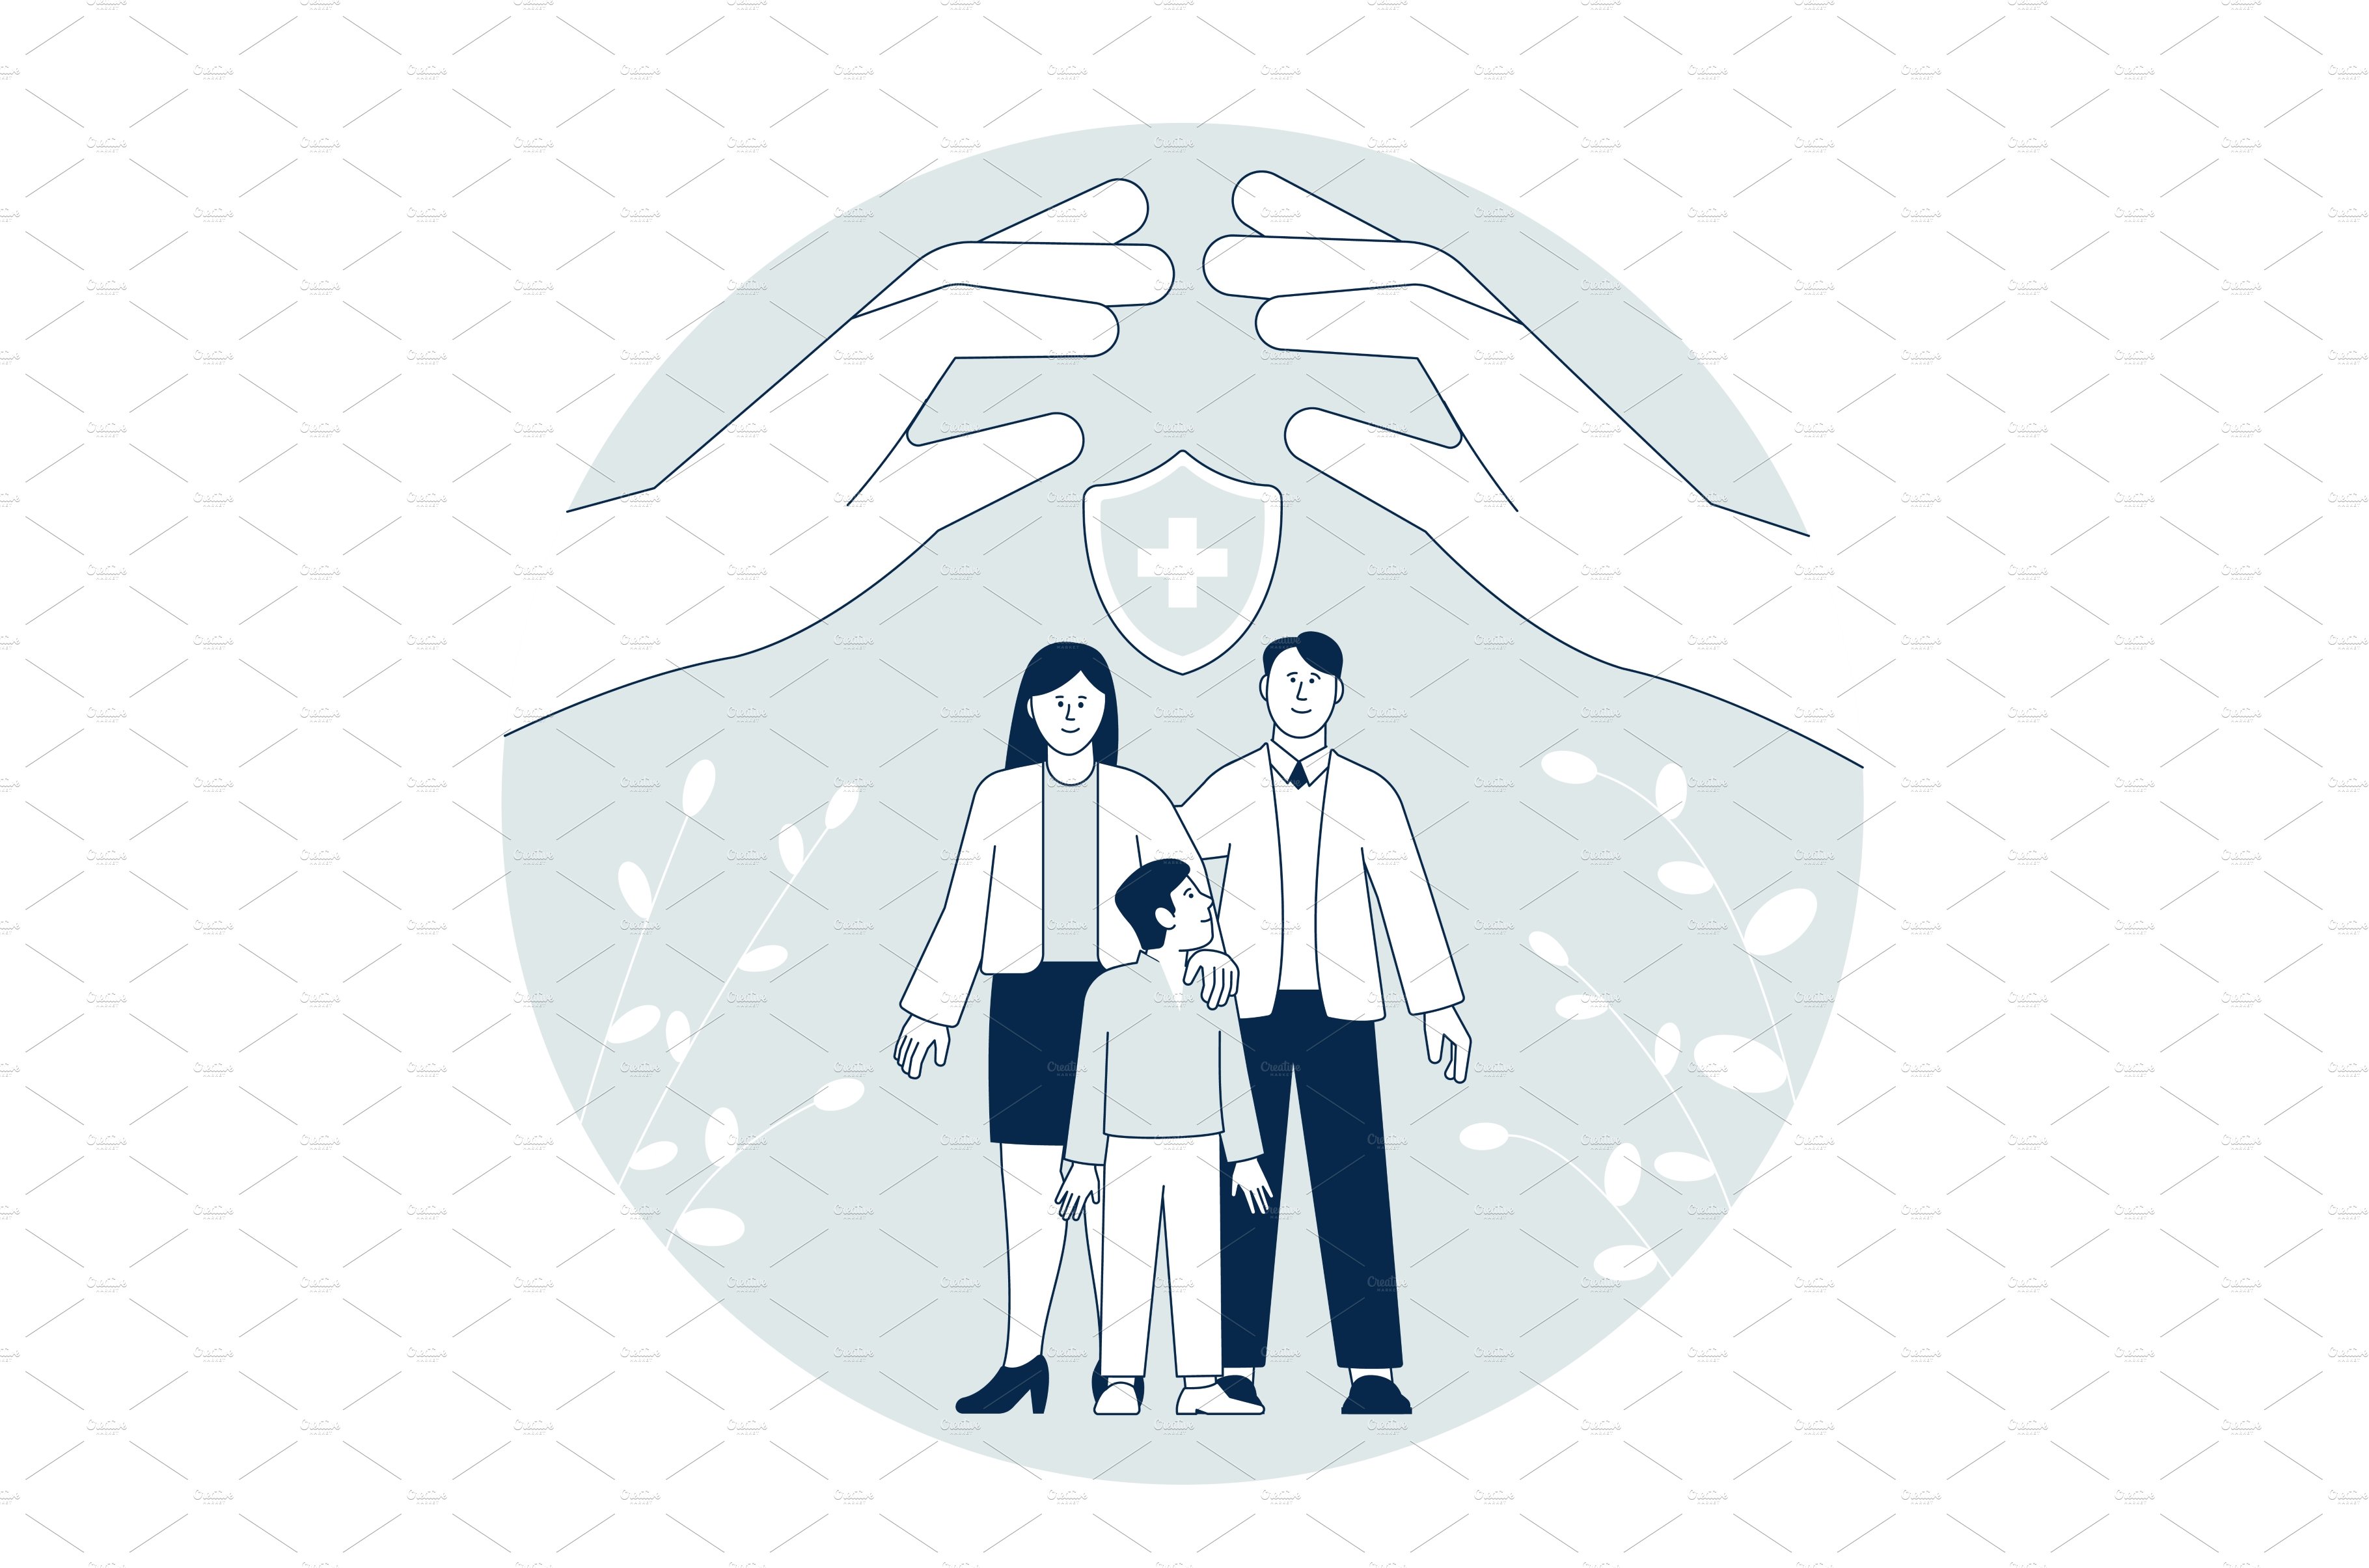 Family insurance. Safe people cover image.